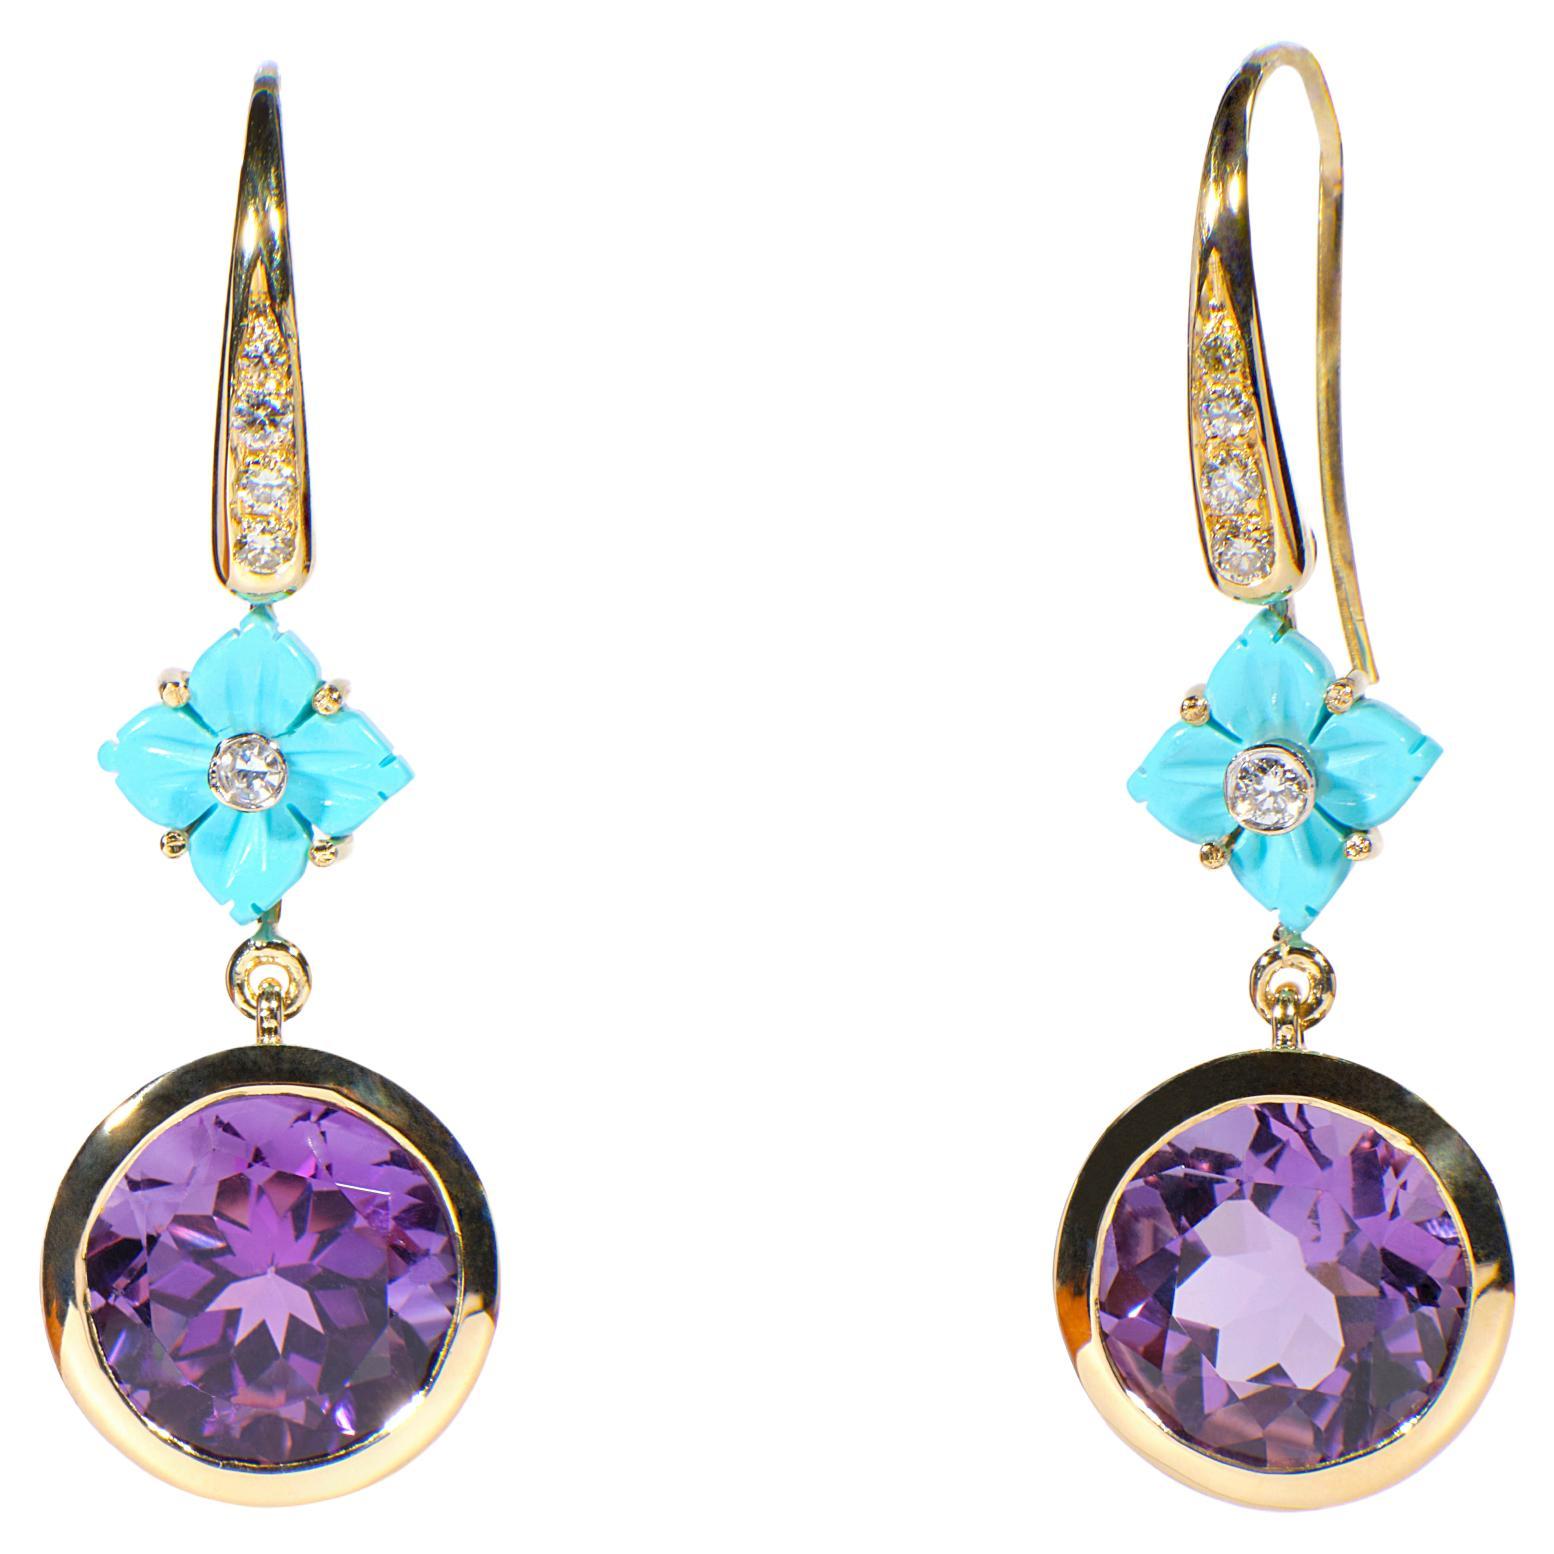 Unique 18k Gold Earrings Turquoise Flower Amethyst Diamonds Handcrafted in Italy For Sale